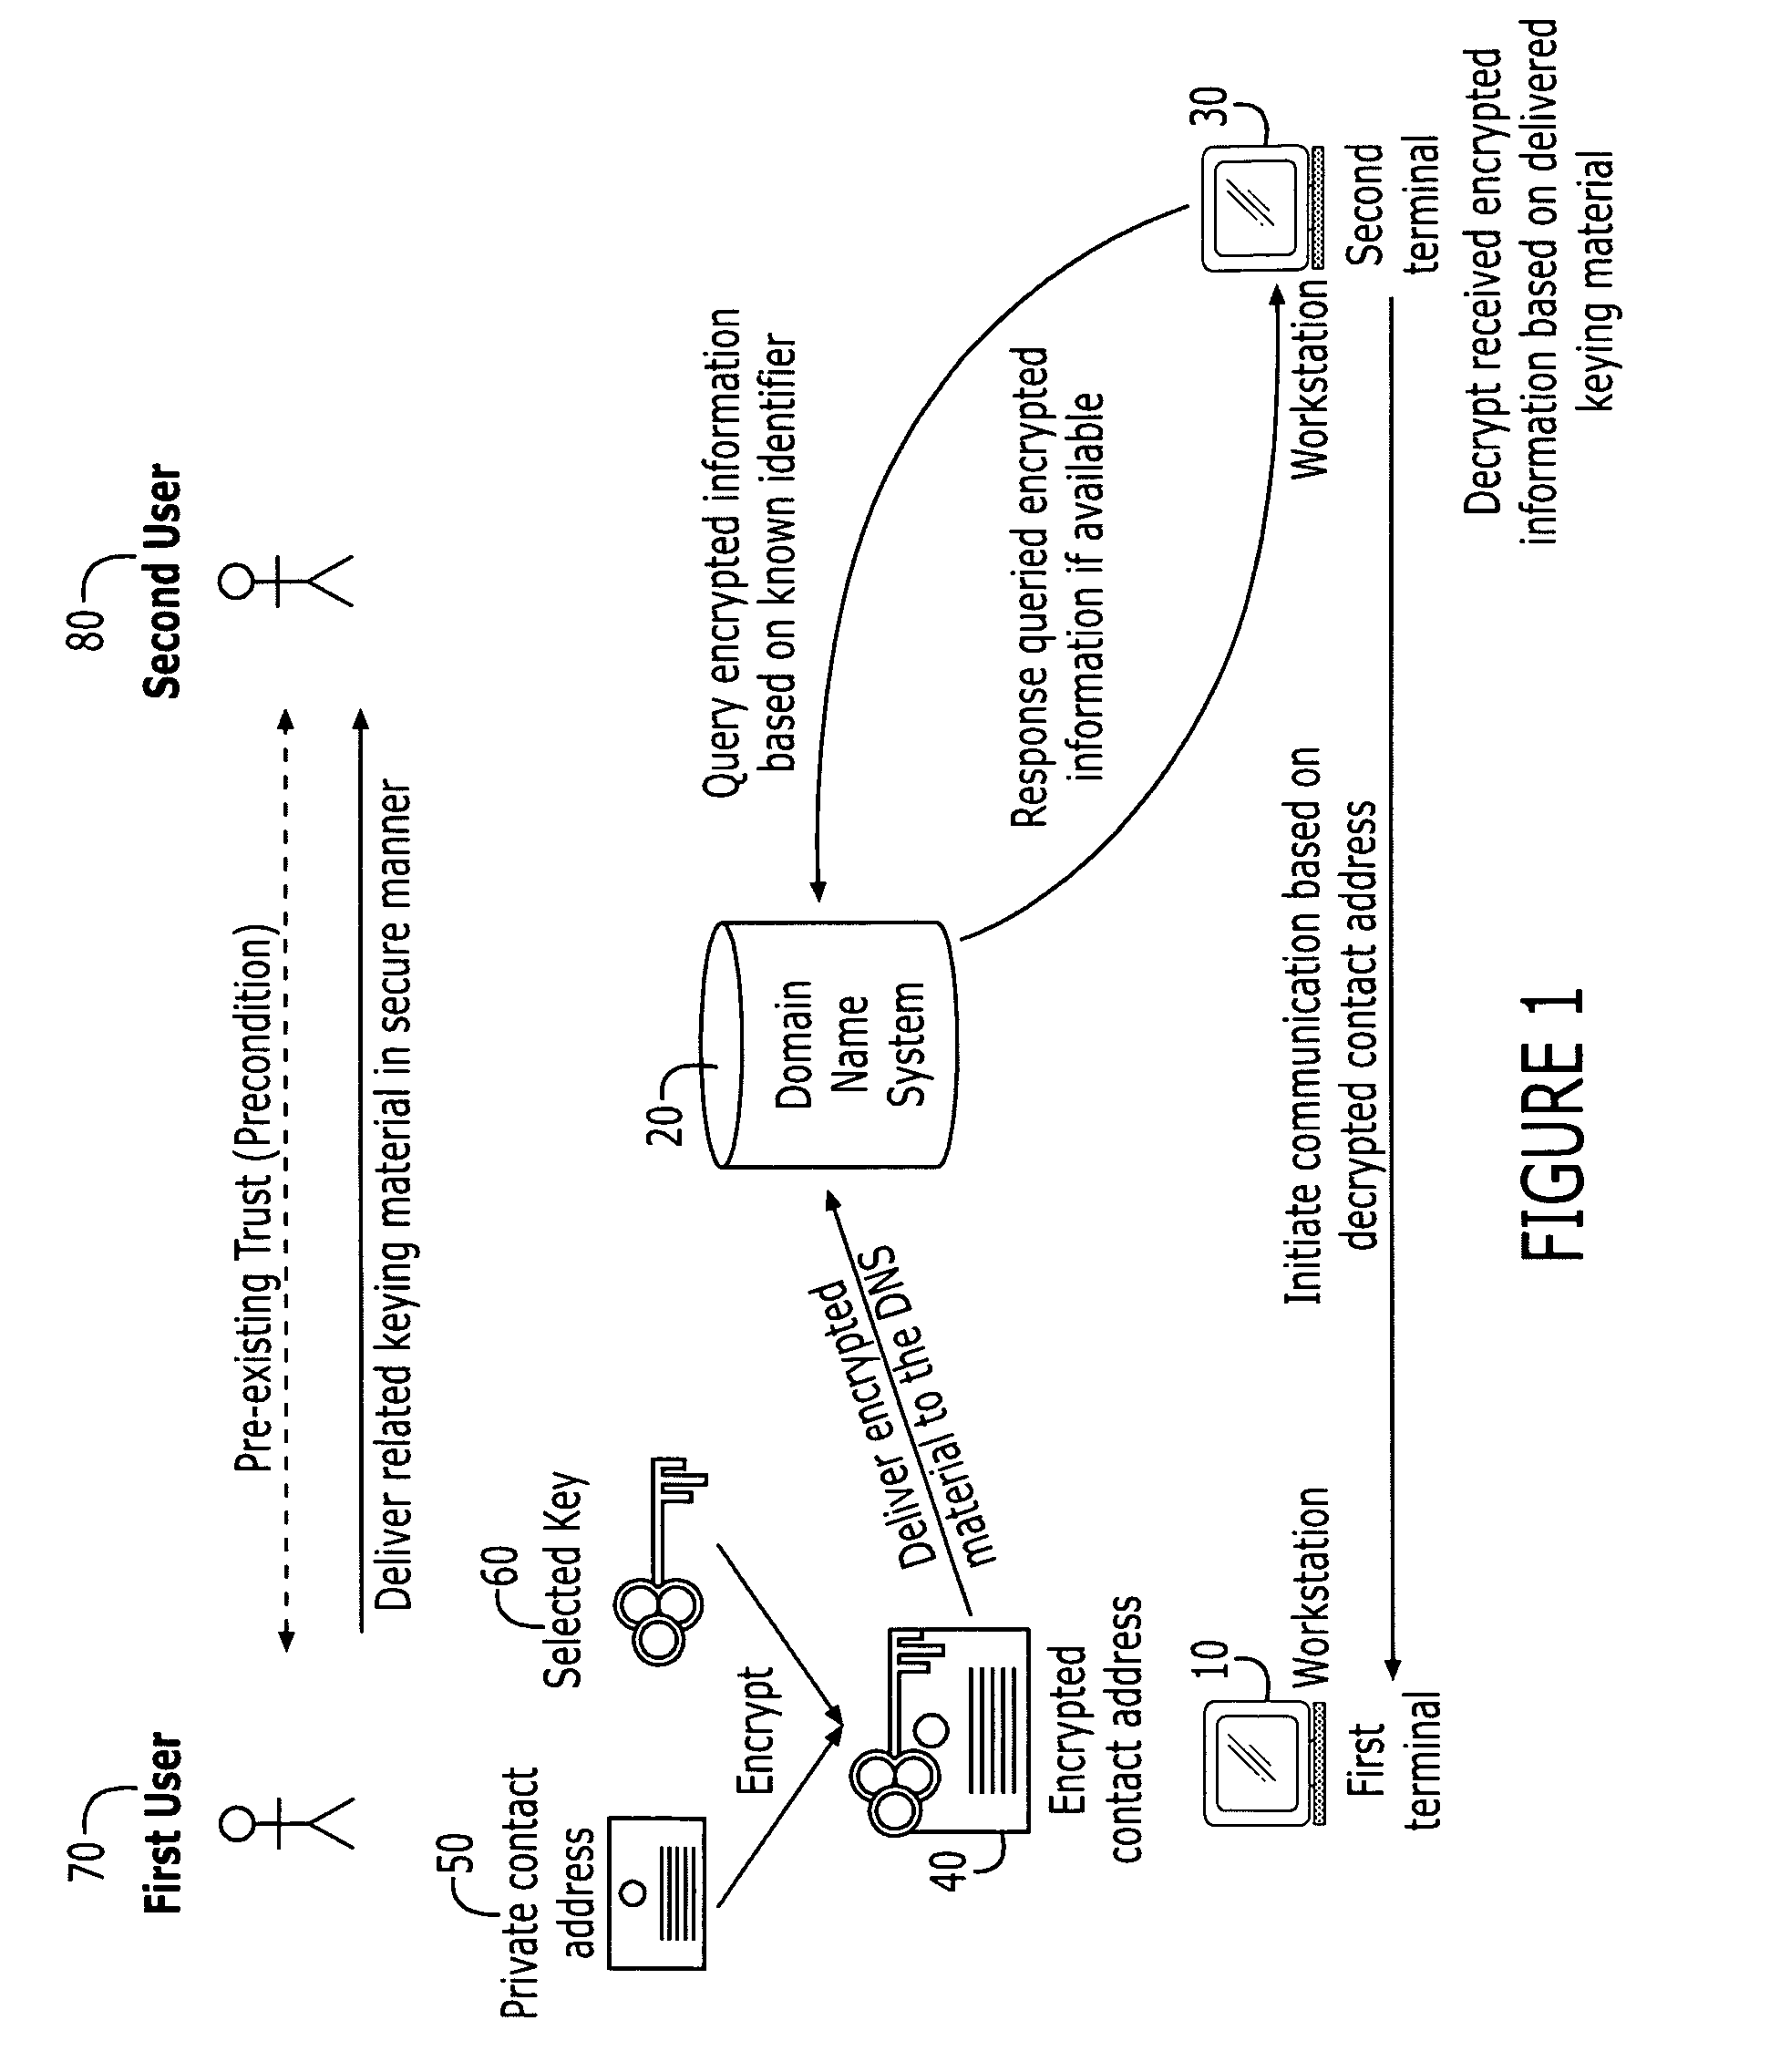 Systems and methods for secured domain name system use based on pre-existing trust